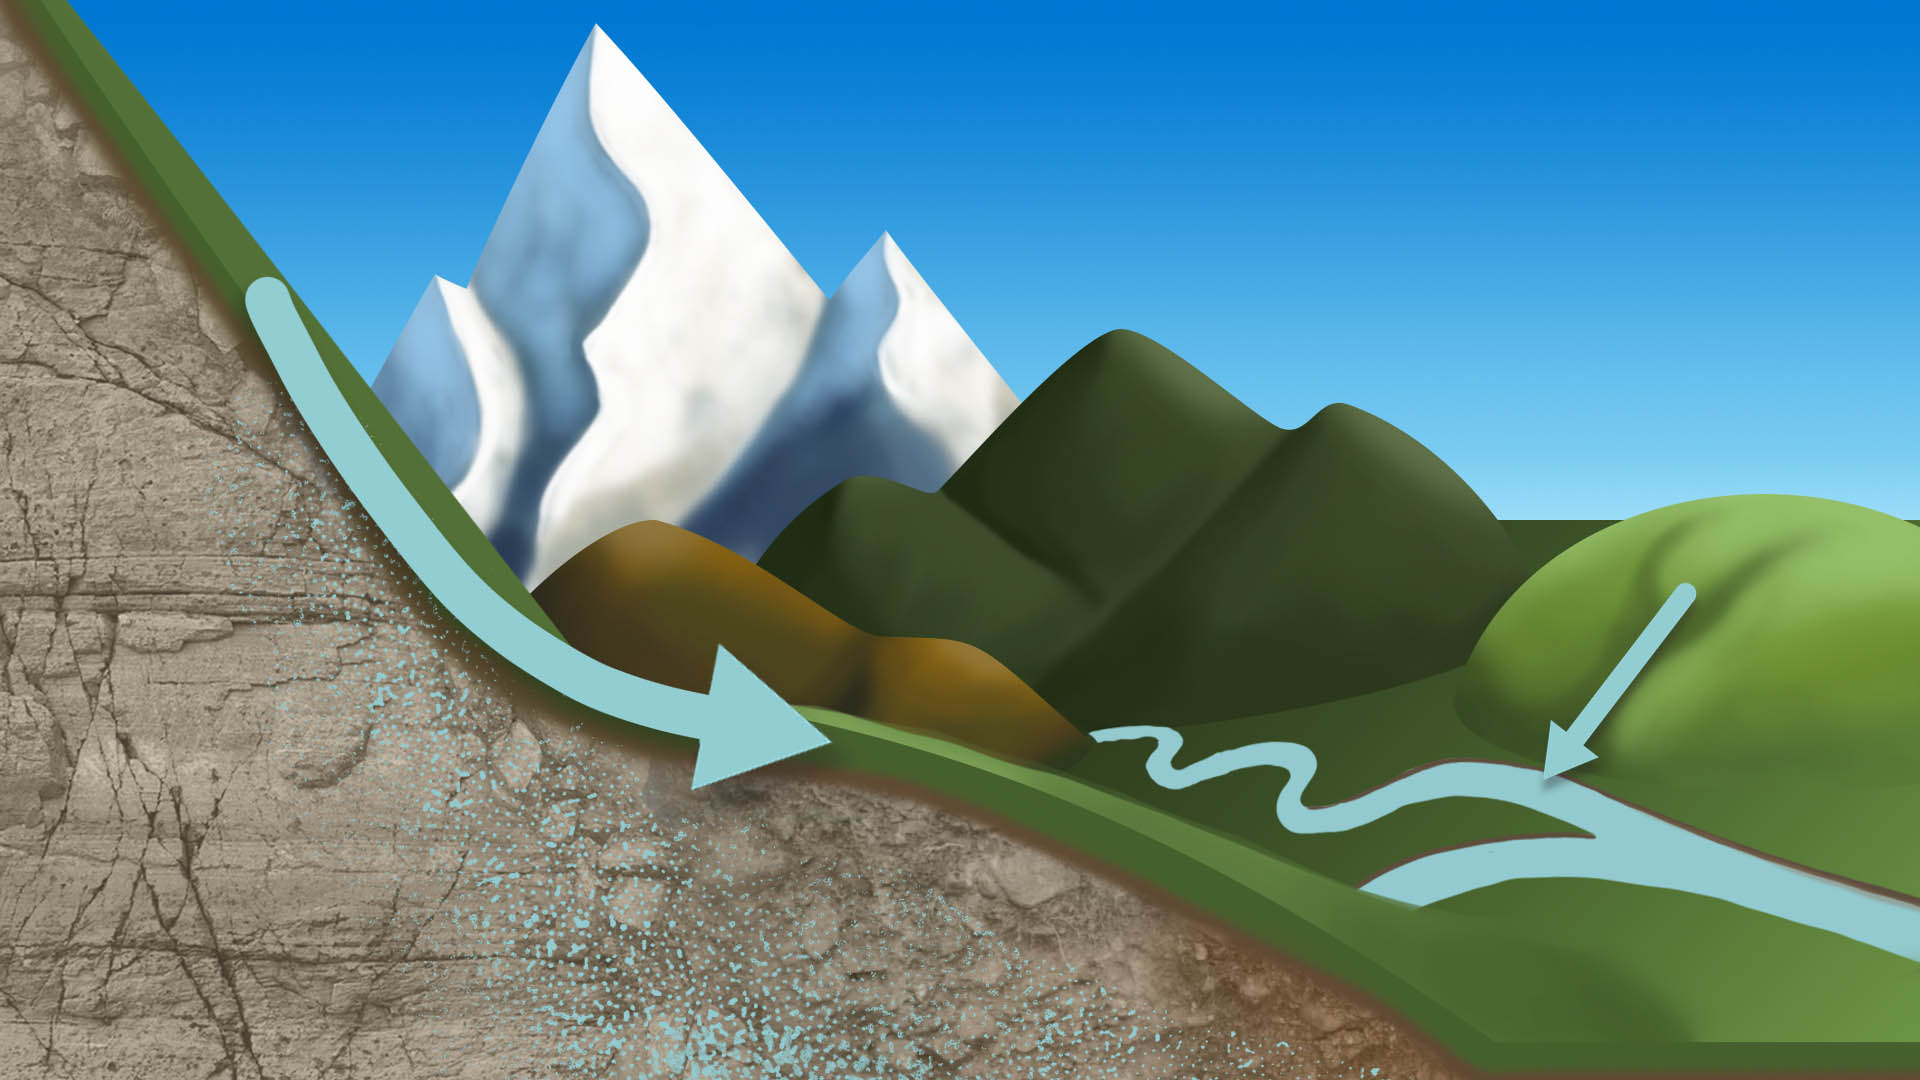 3D diagram showing water movement down the side of a hill